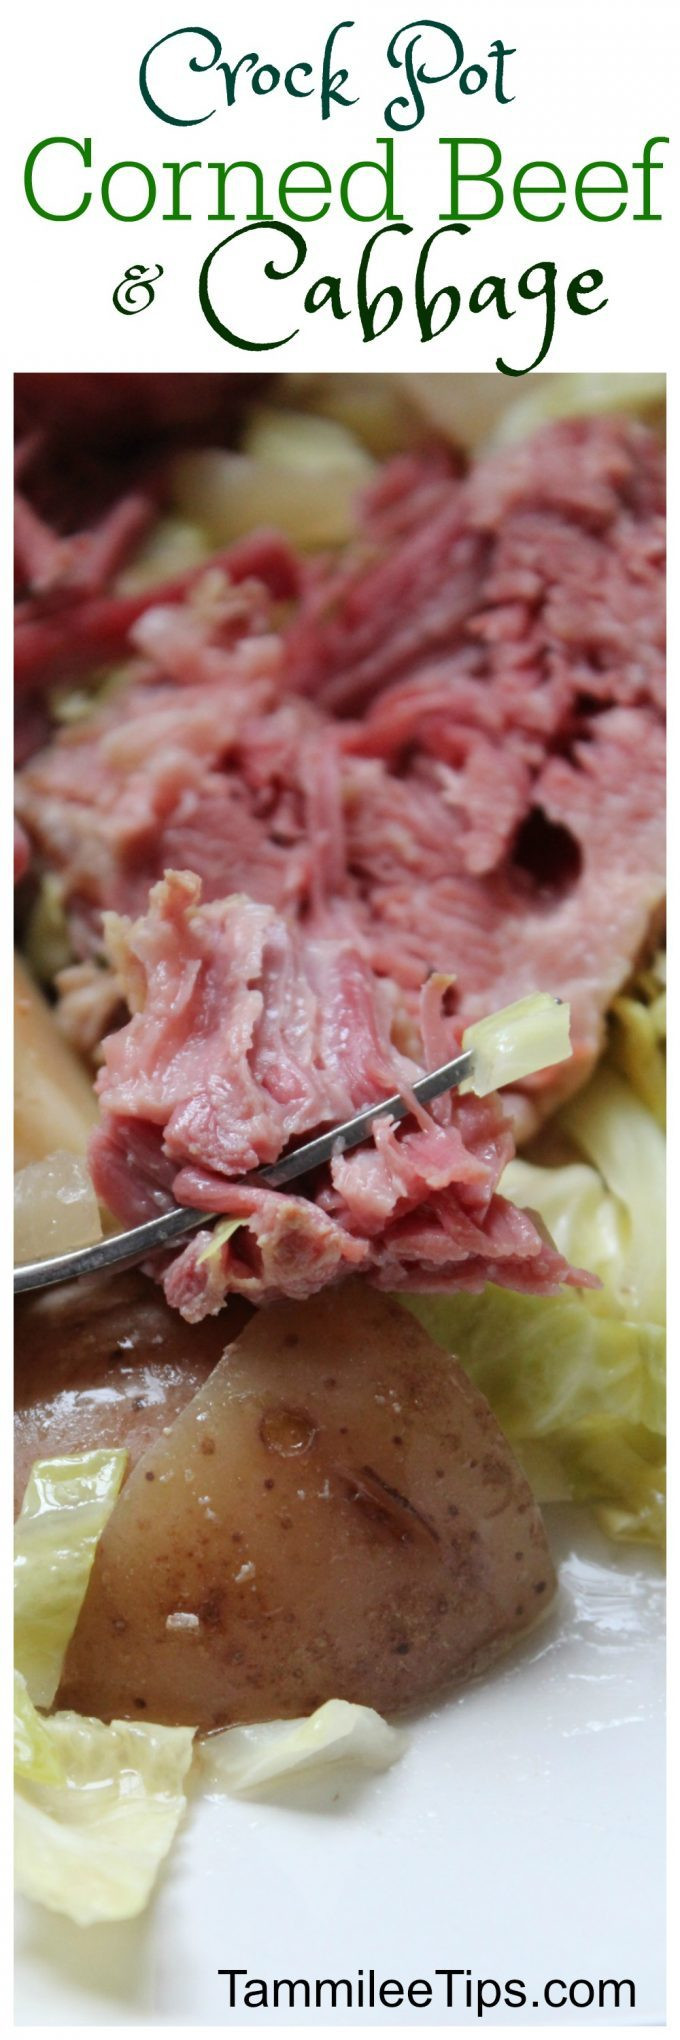 Crockpot Corn Beef And Cabbage
 Crock Pot Corned Beef and Cabbage Tammilee Tips